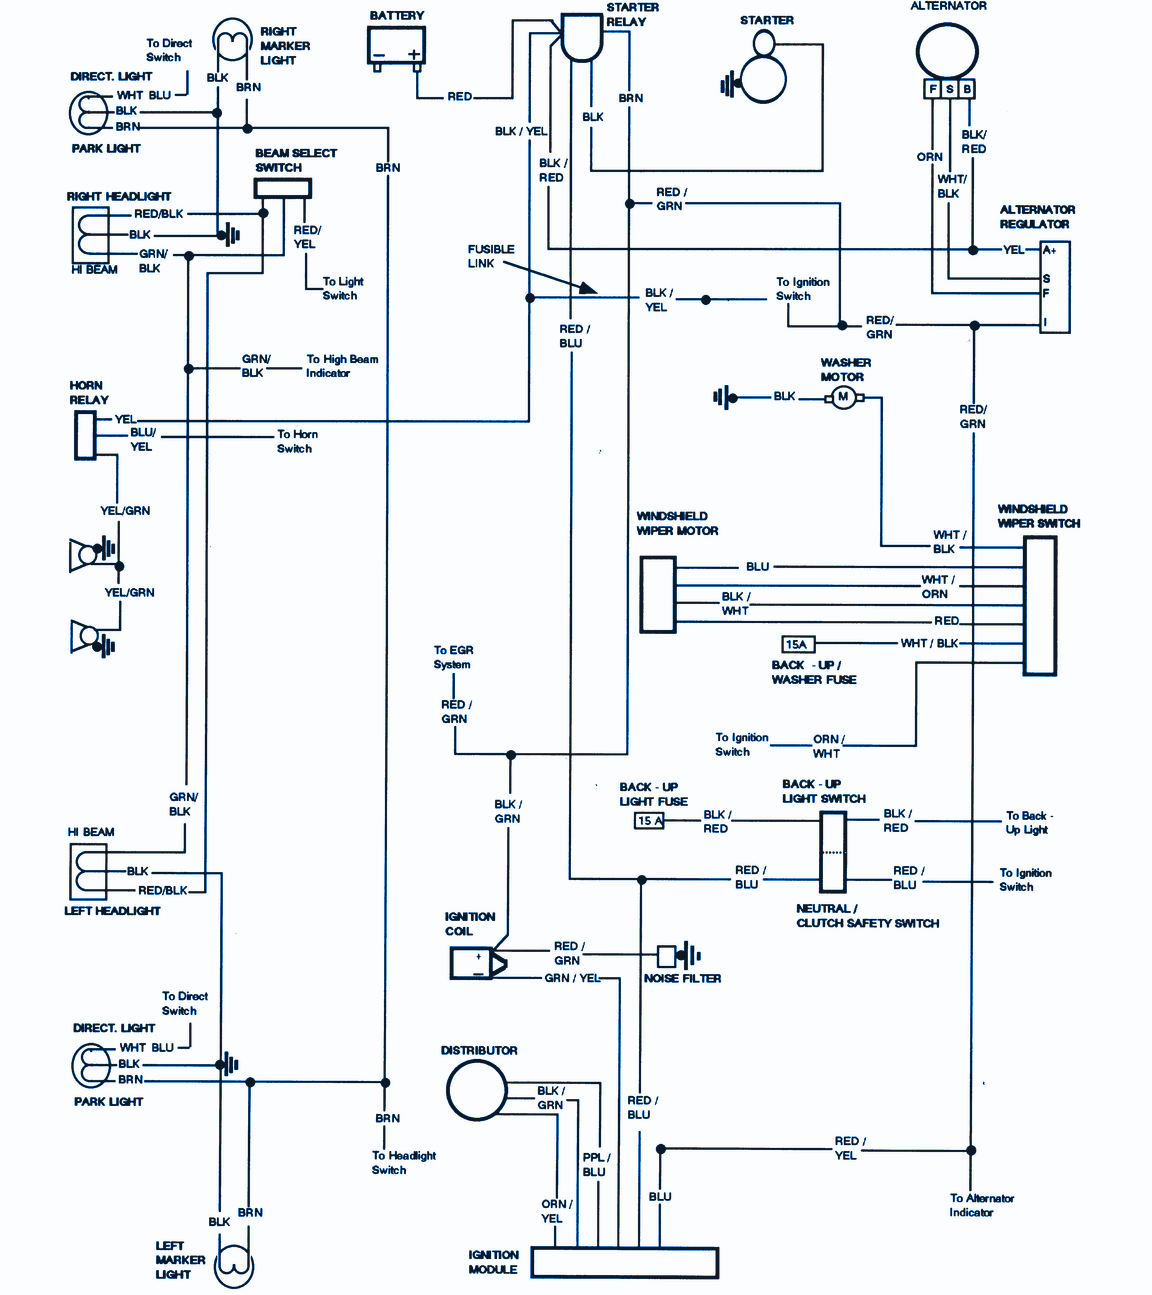 Need wiring help 1978 F150 - Ford Truck Enthusiasts Forums